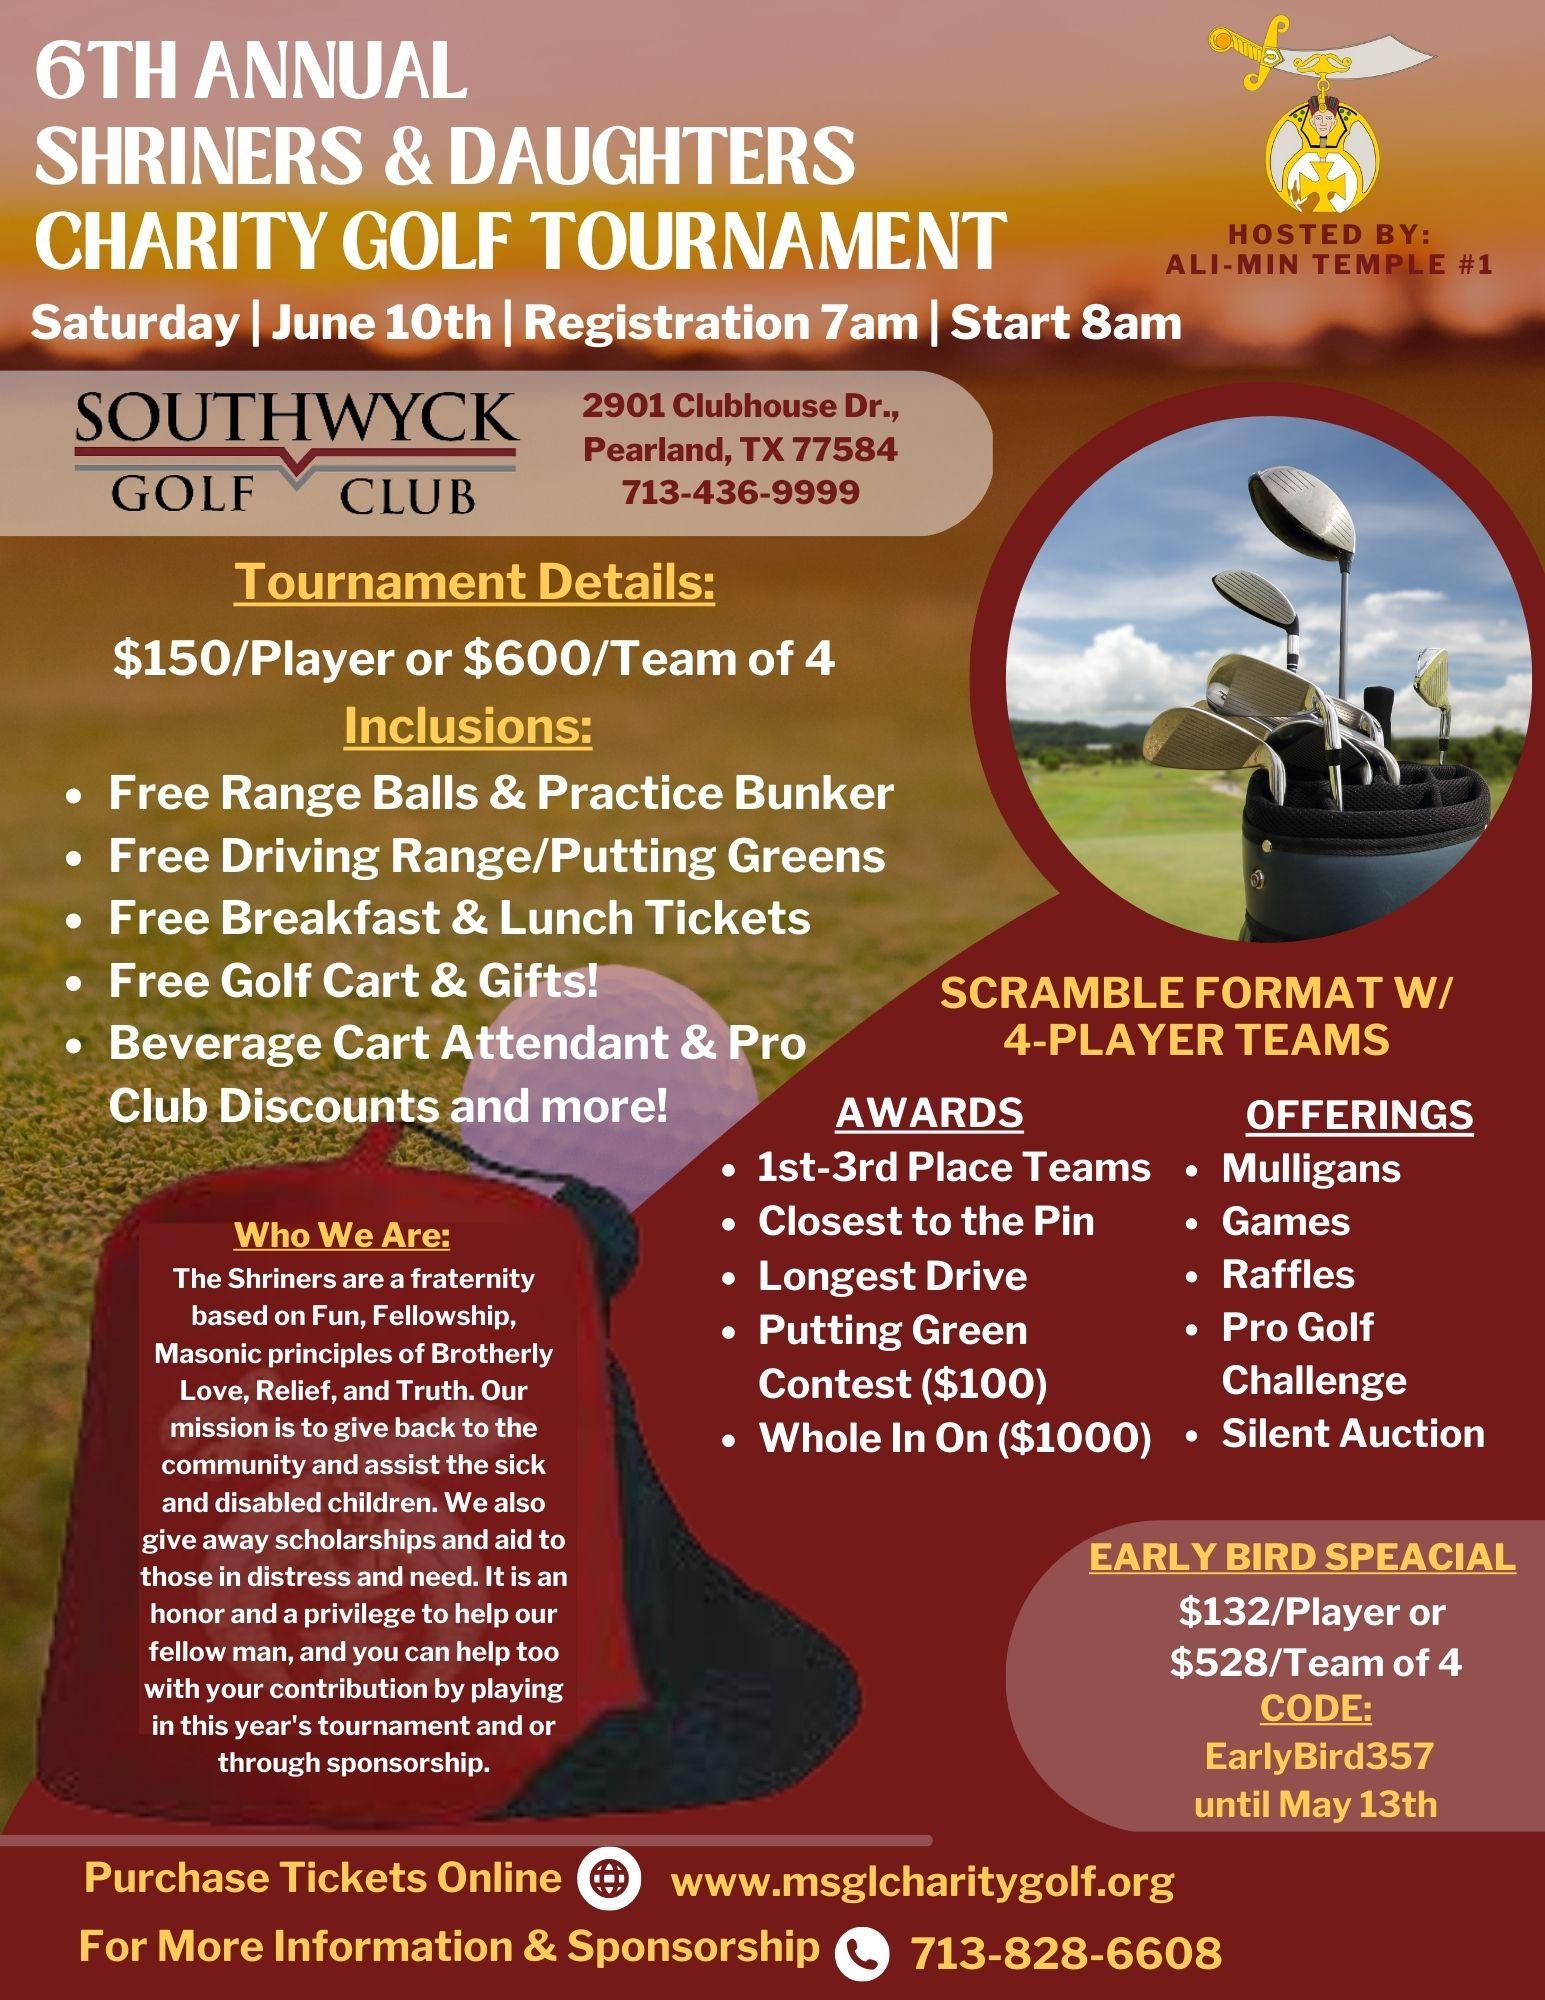 Shriners & Daughters 6th Annual Charity Golf Tournament